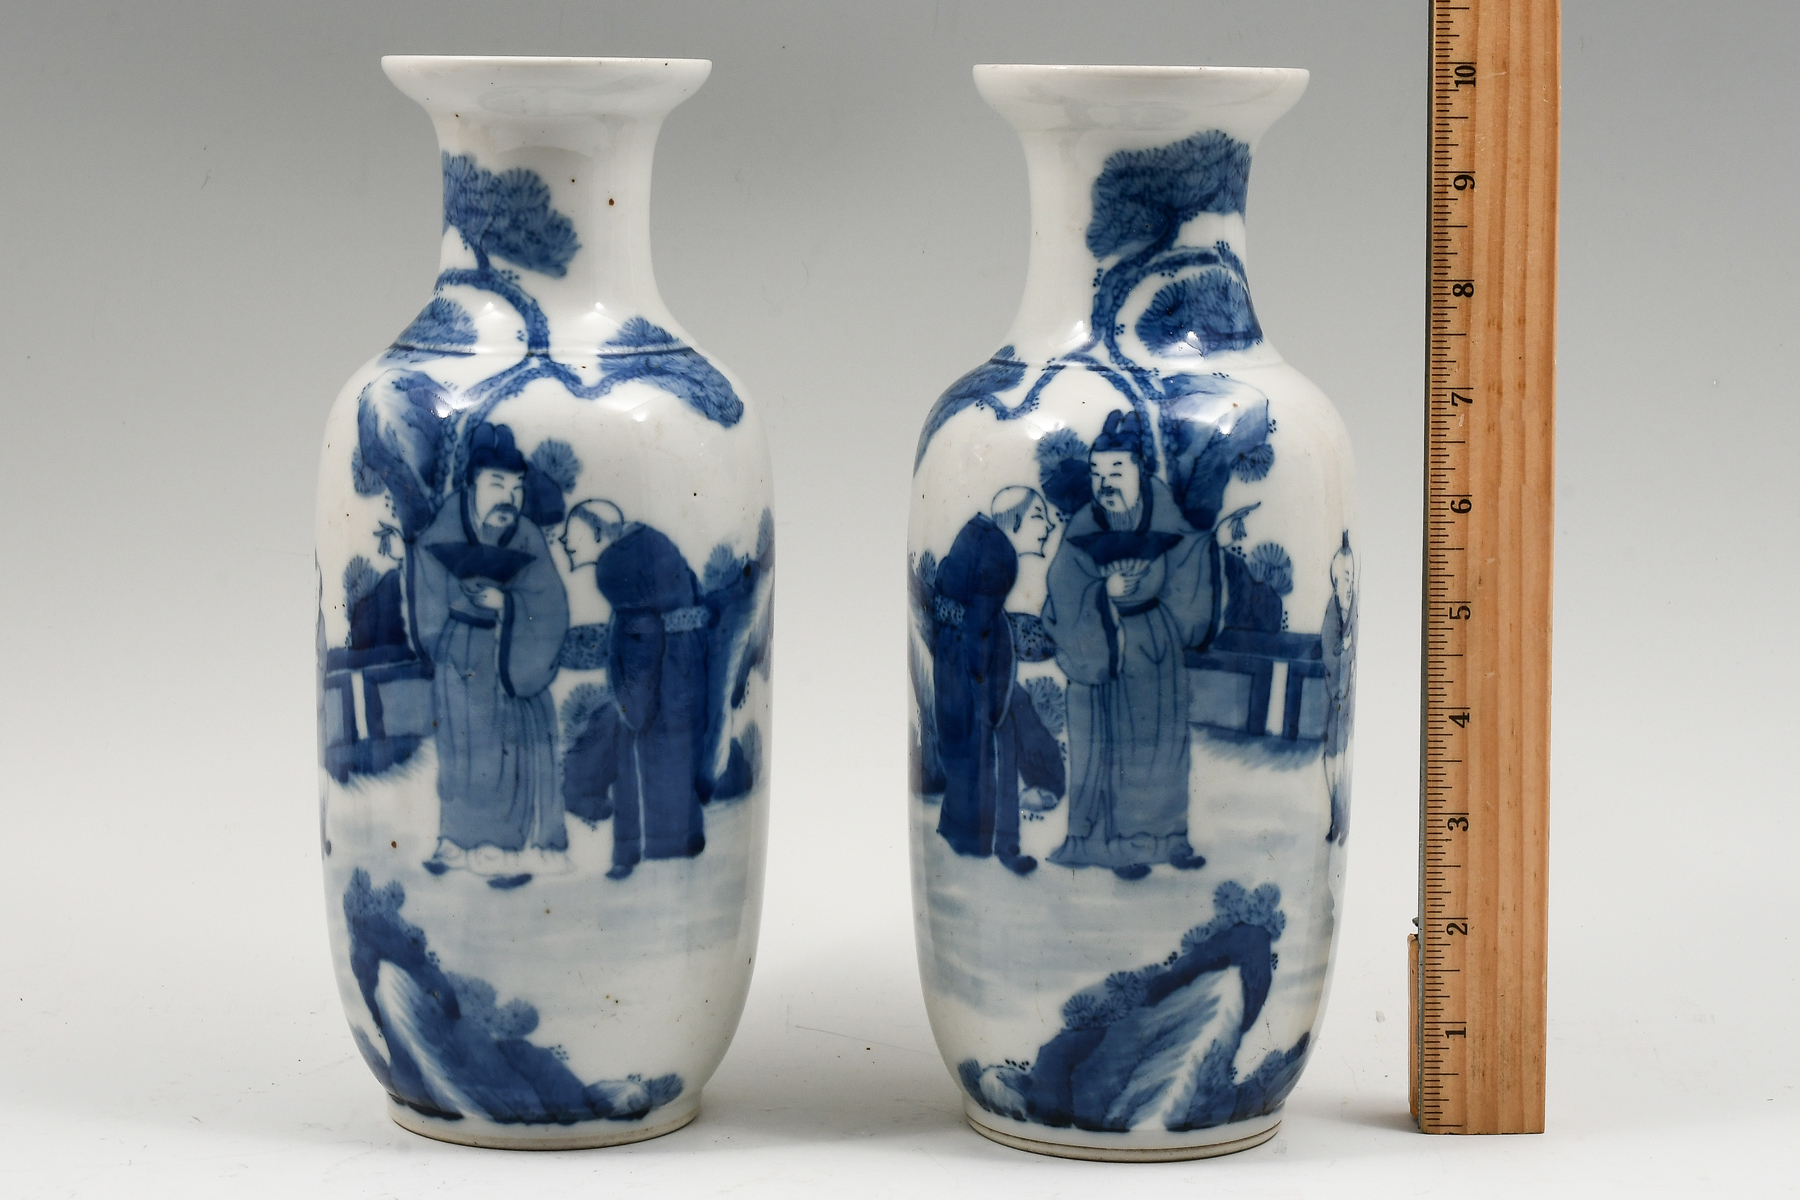 PAIR OF CHINESE PORCELAIN BALUSTER